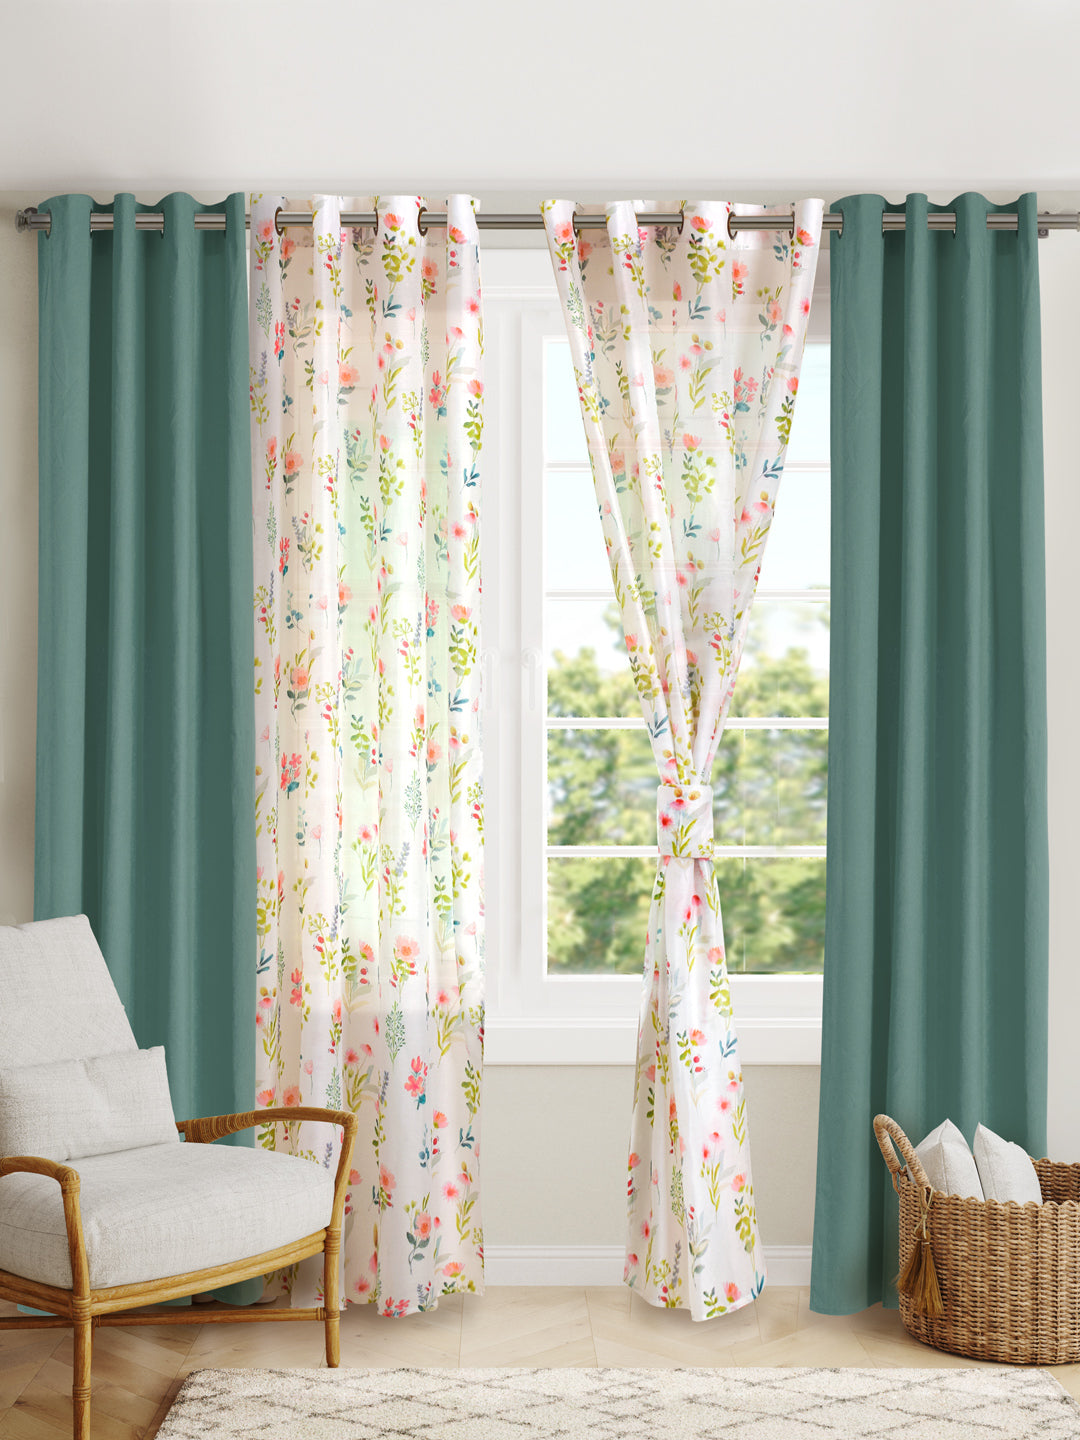 Set Of 4 Flora Printed With Green Plain 7Ft. Curtains